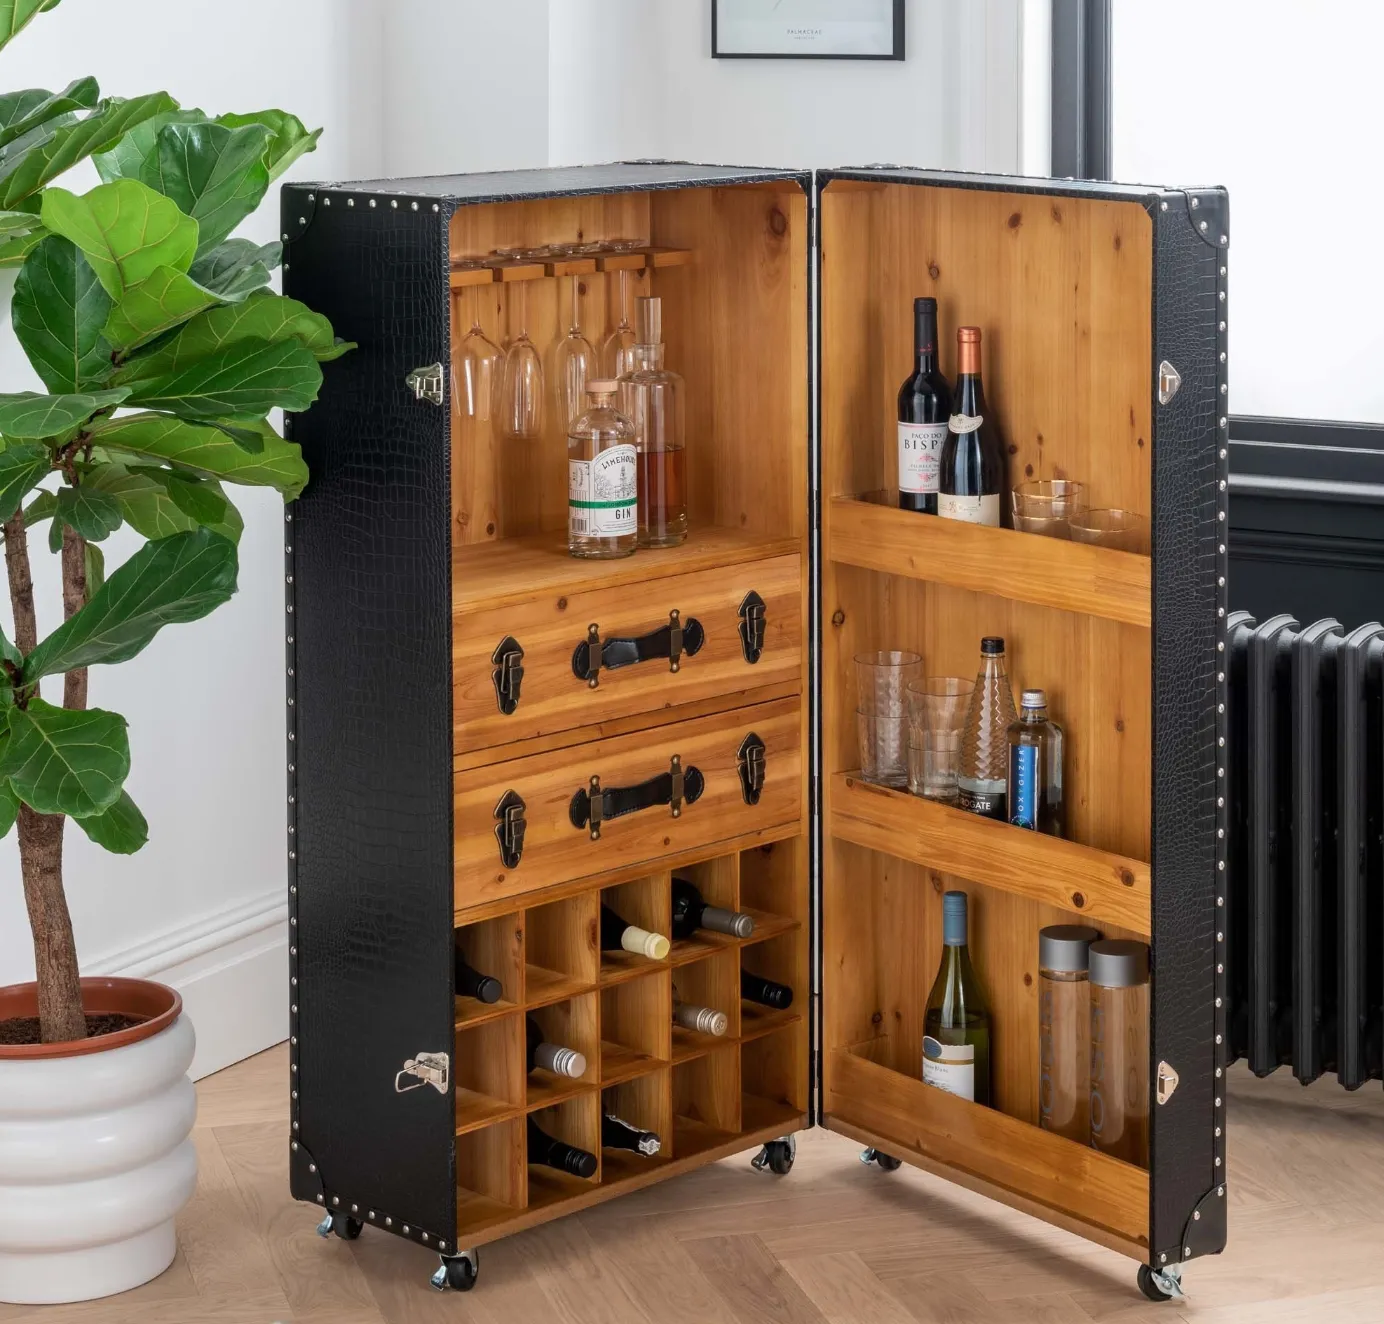 An Old Trunk made into a Wine Cabinet - classic upcycle 